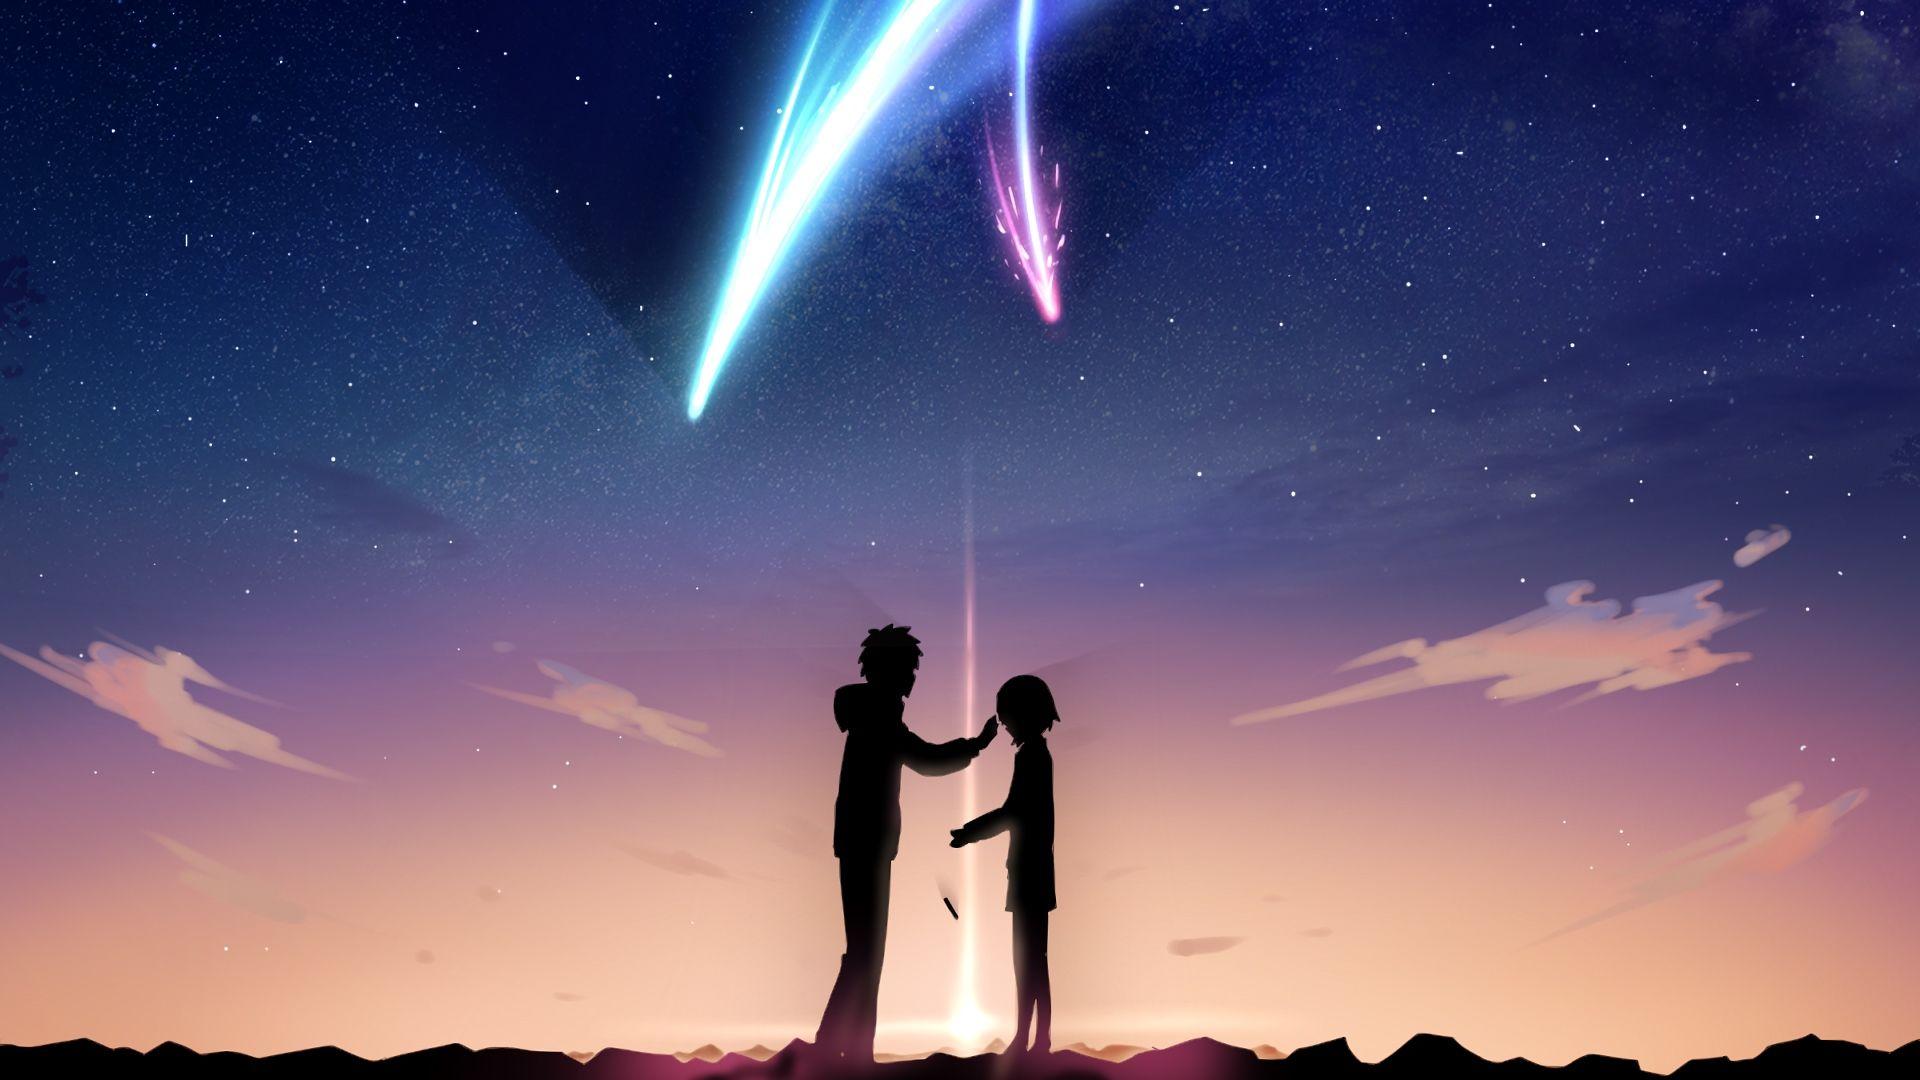 Your Name Anime Desktop Wallpapers Wallpaper Cave